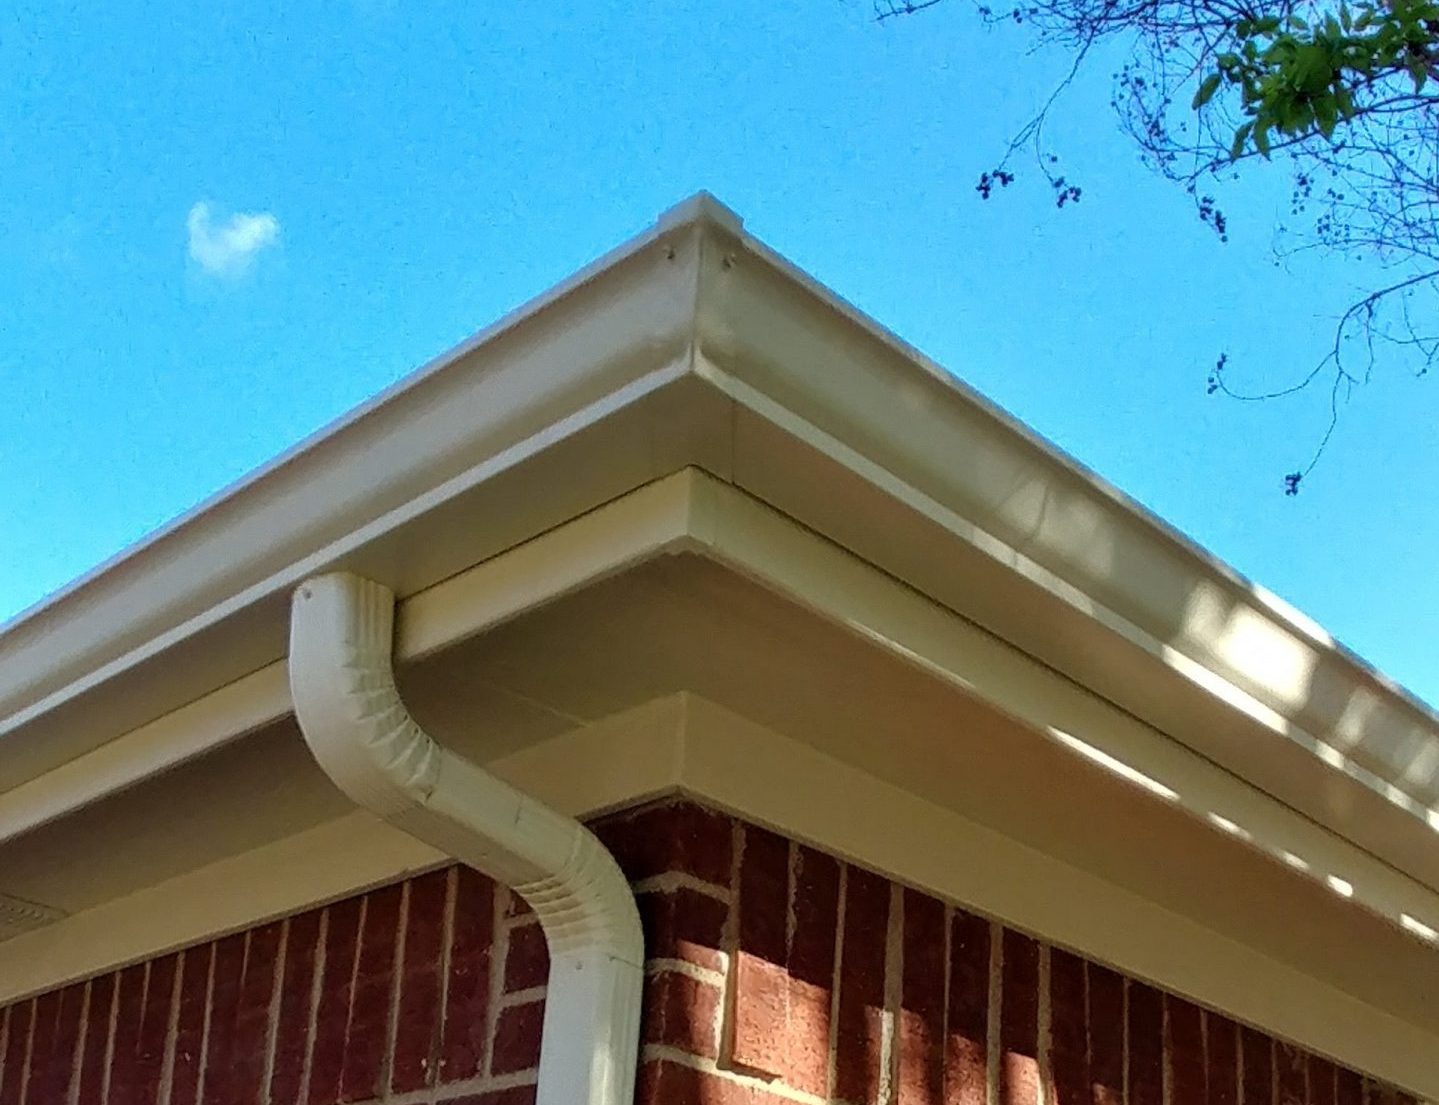 fascia and soffit of a house